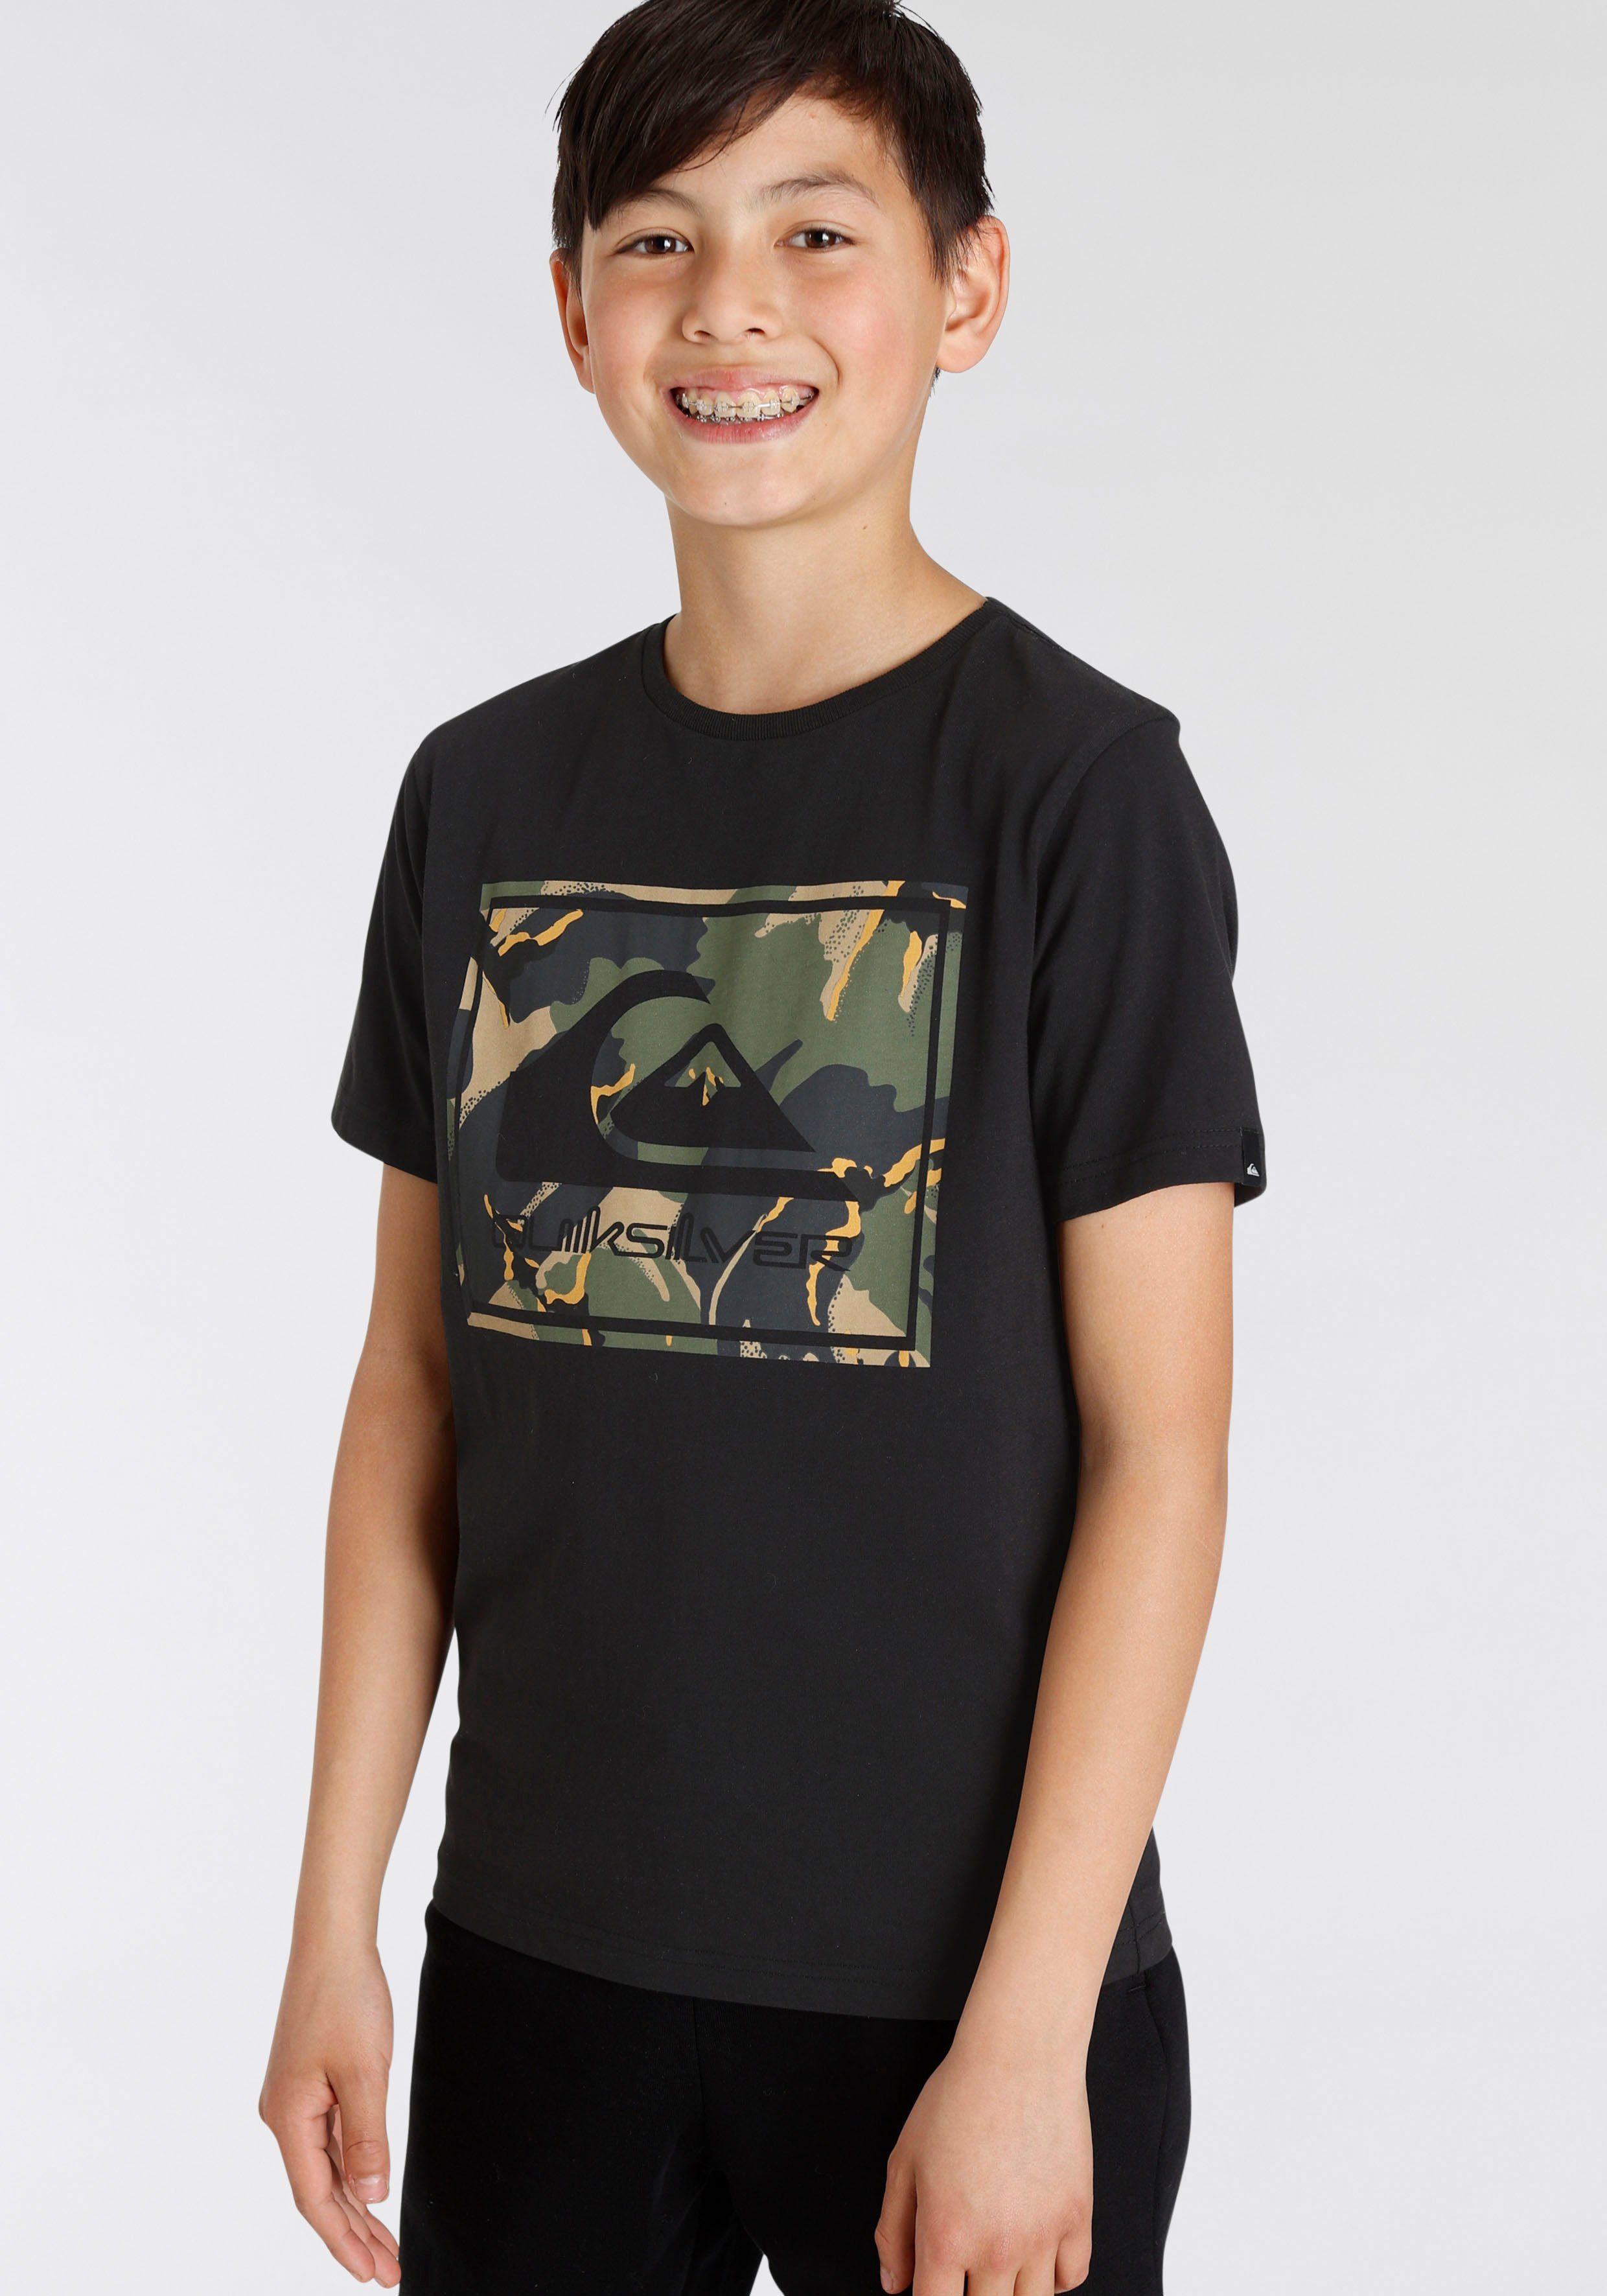 Quiksilver PACK für ARCHICAMO TEE T-Shirt Kinder YOUTH SLEEVE - SHORT